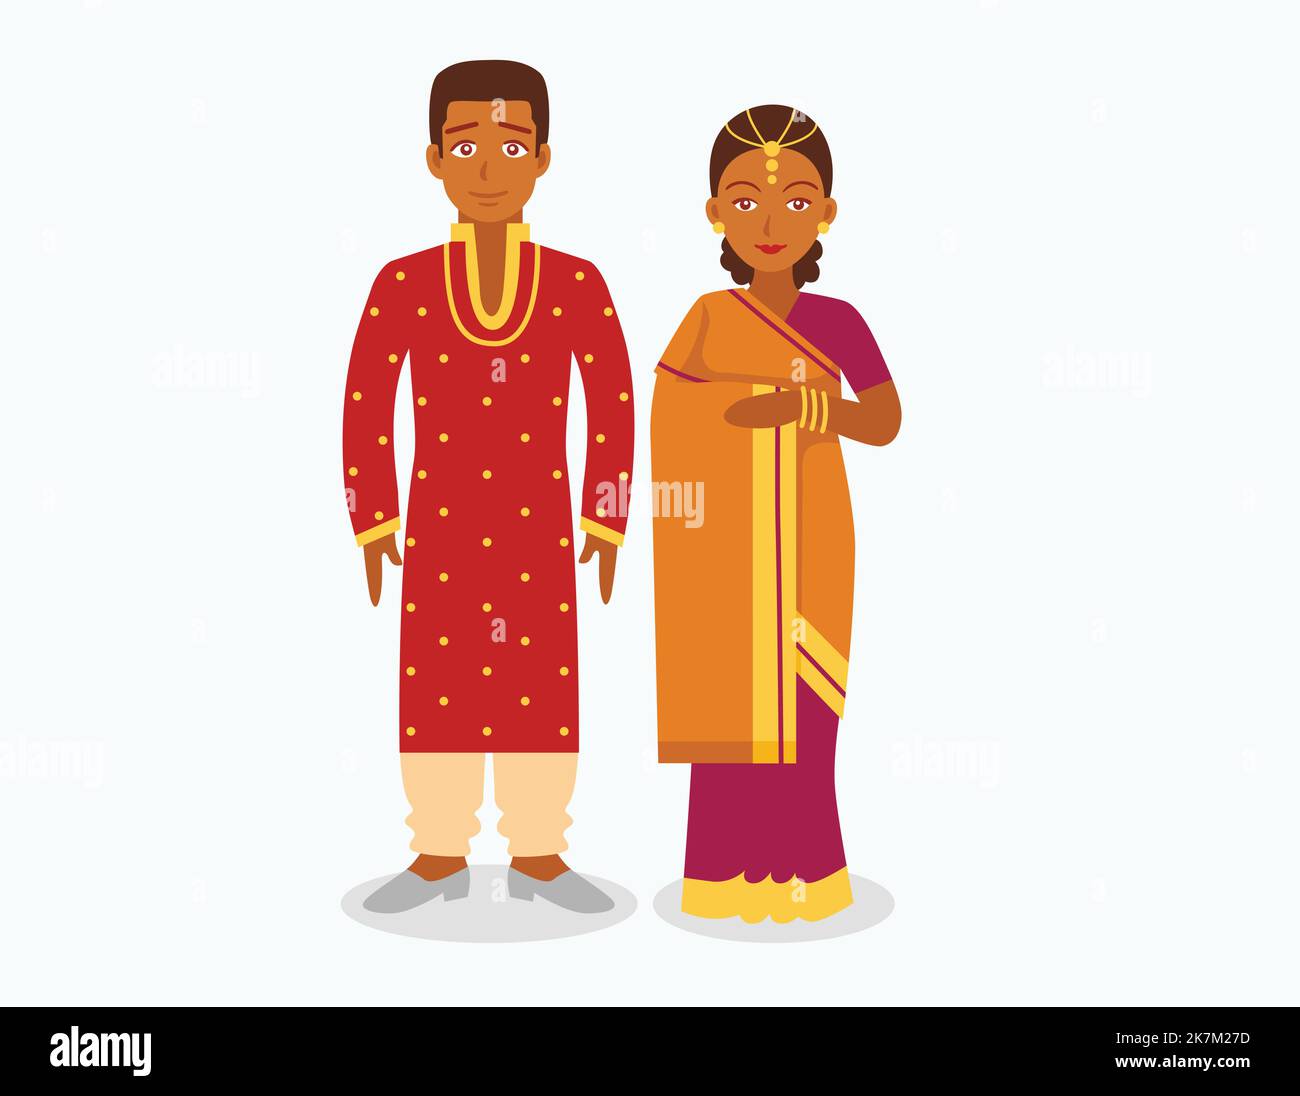 indian couple wearing traditional outfit character illustration on white isolated background Stock Vector